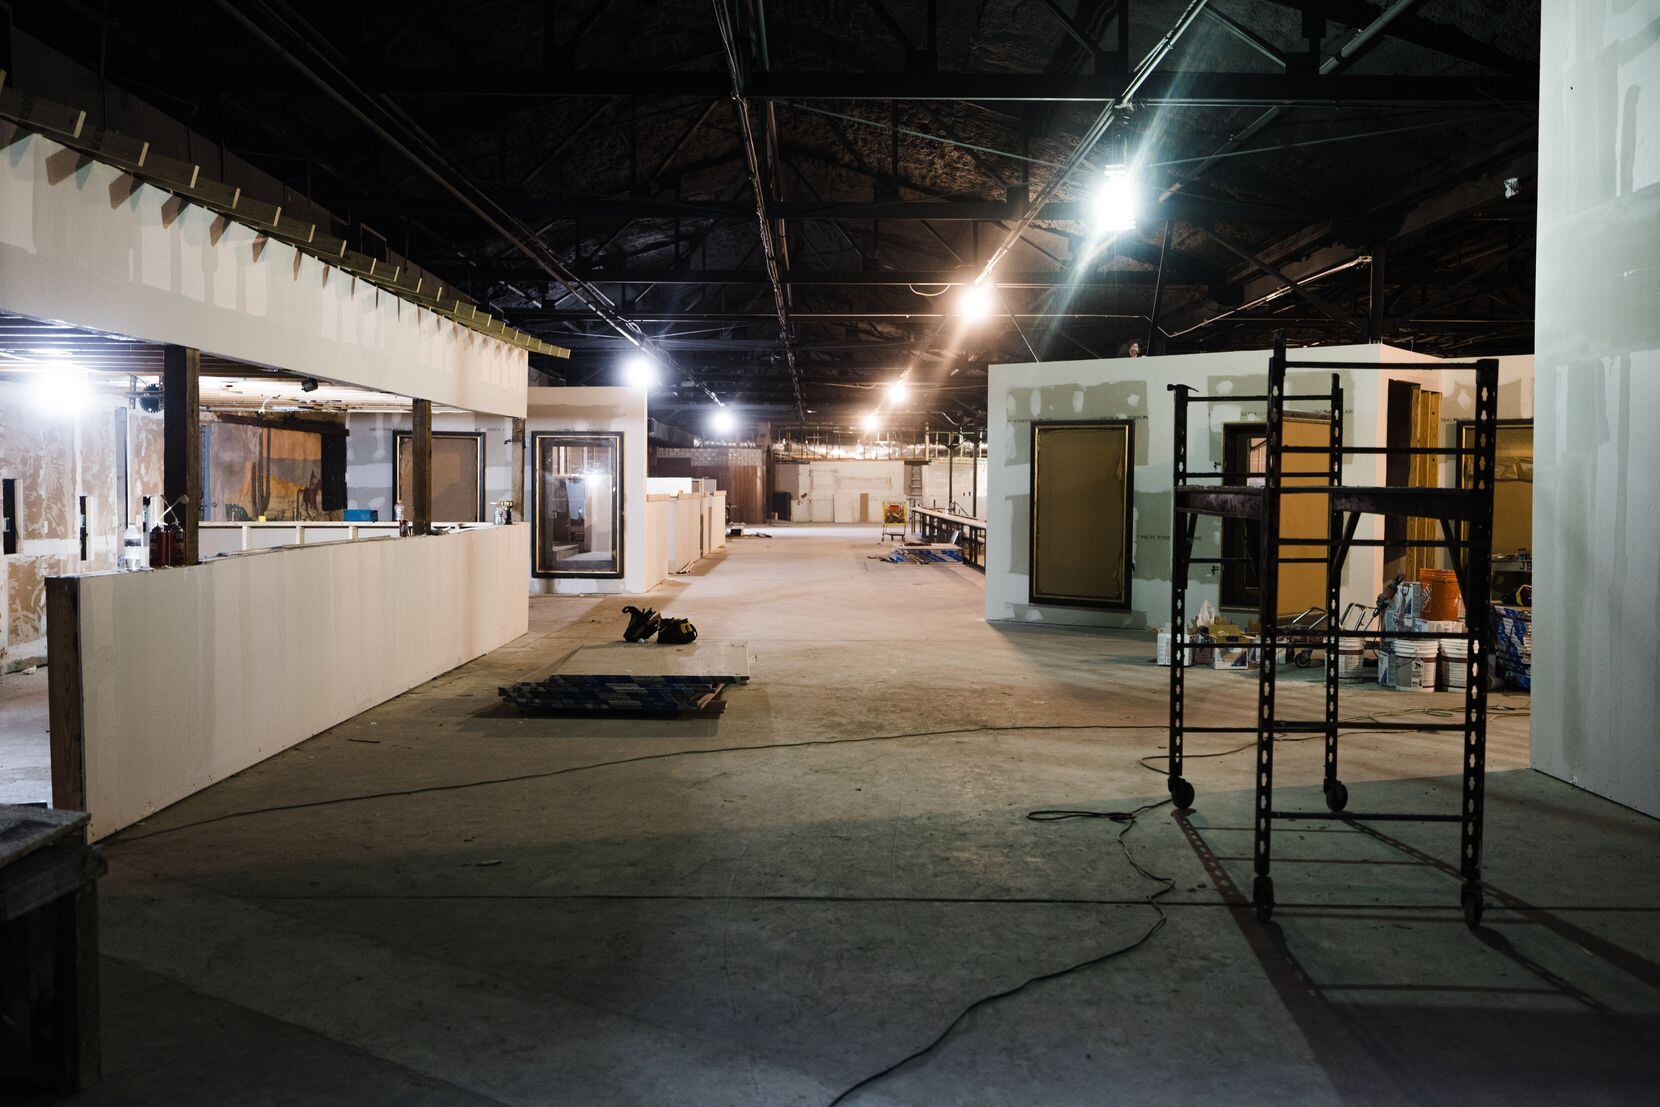 The interior of the Longhorn Ballroom as it undergoes renovations. The venue owner plans to...